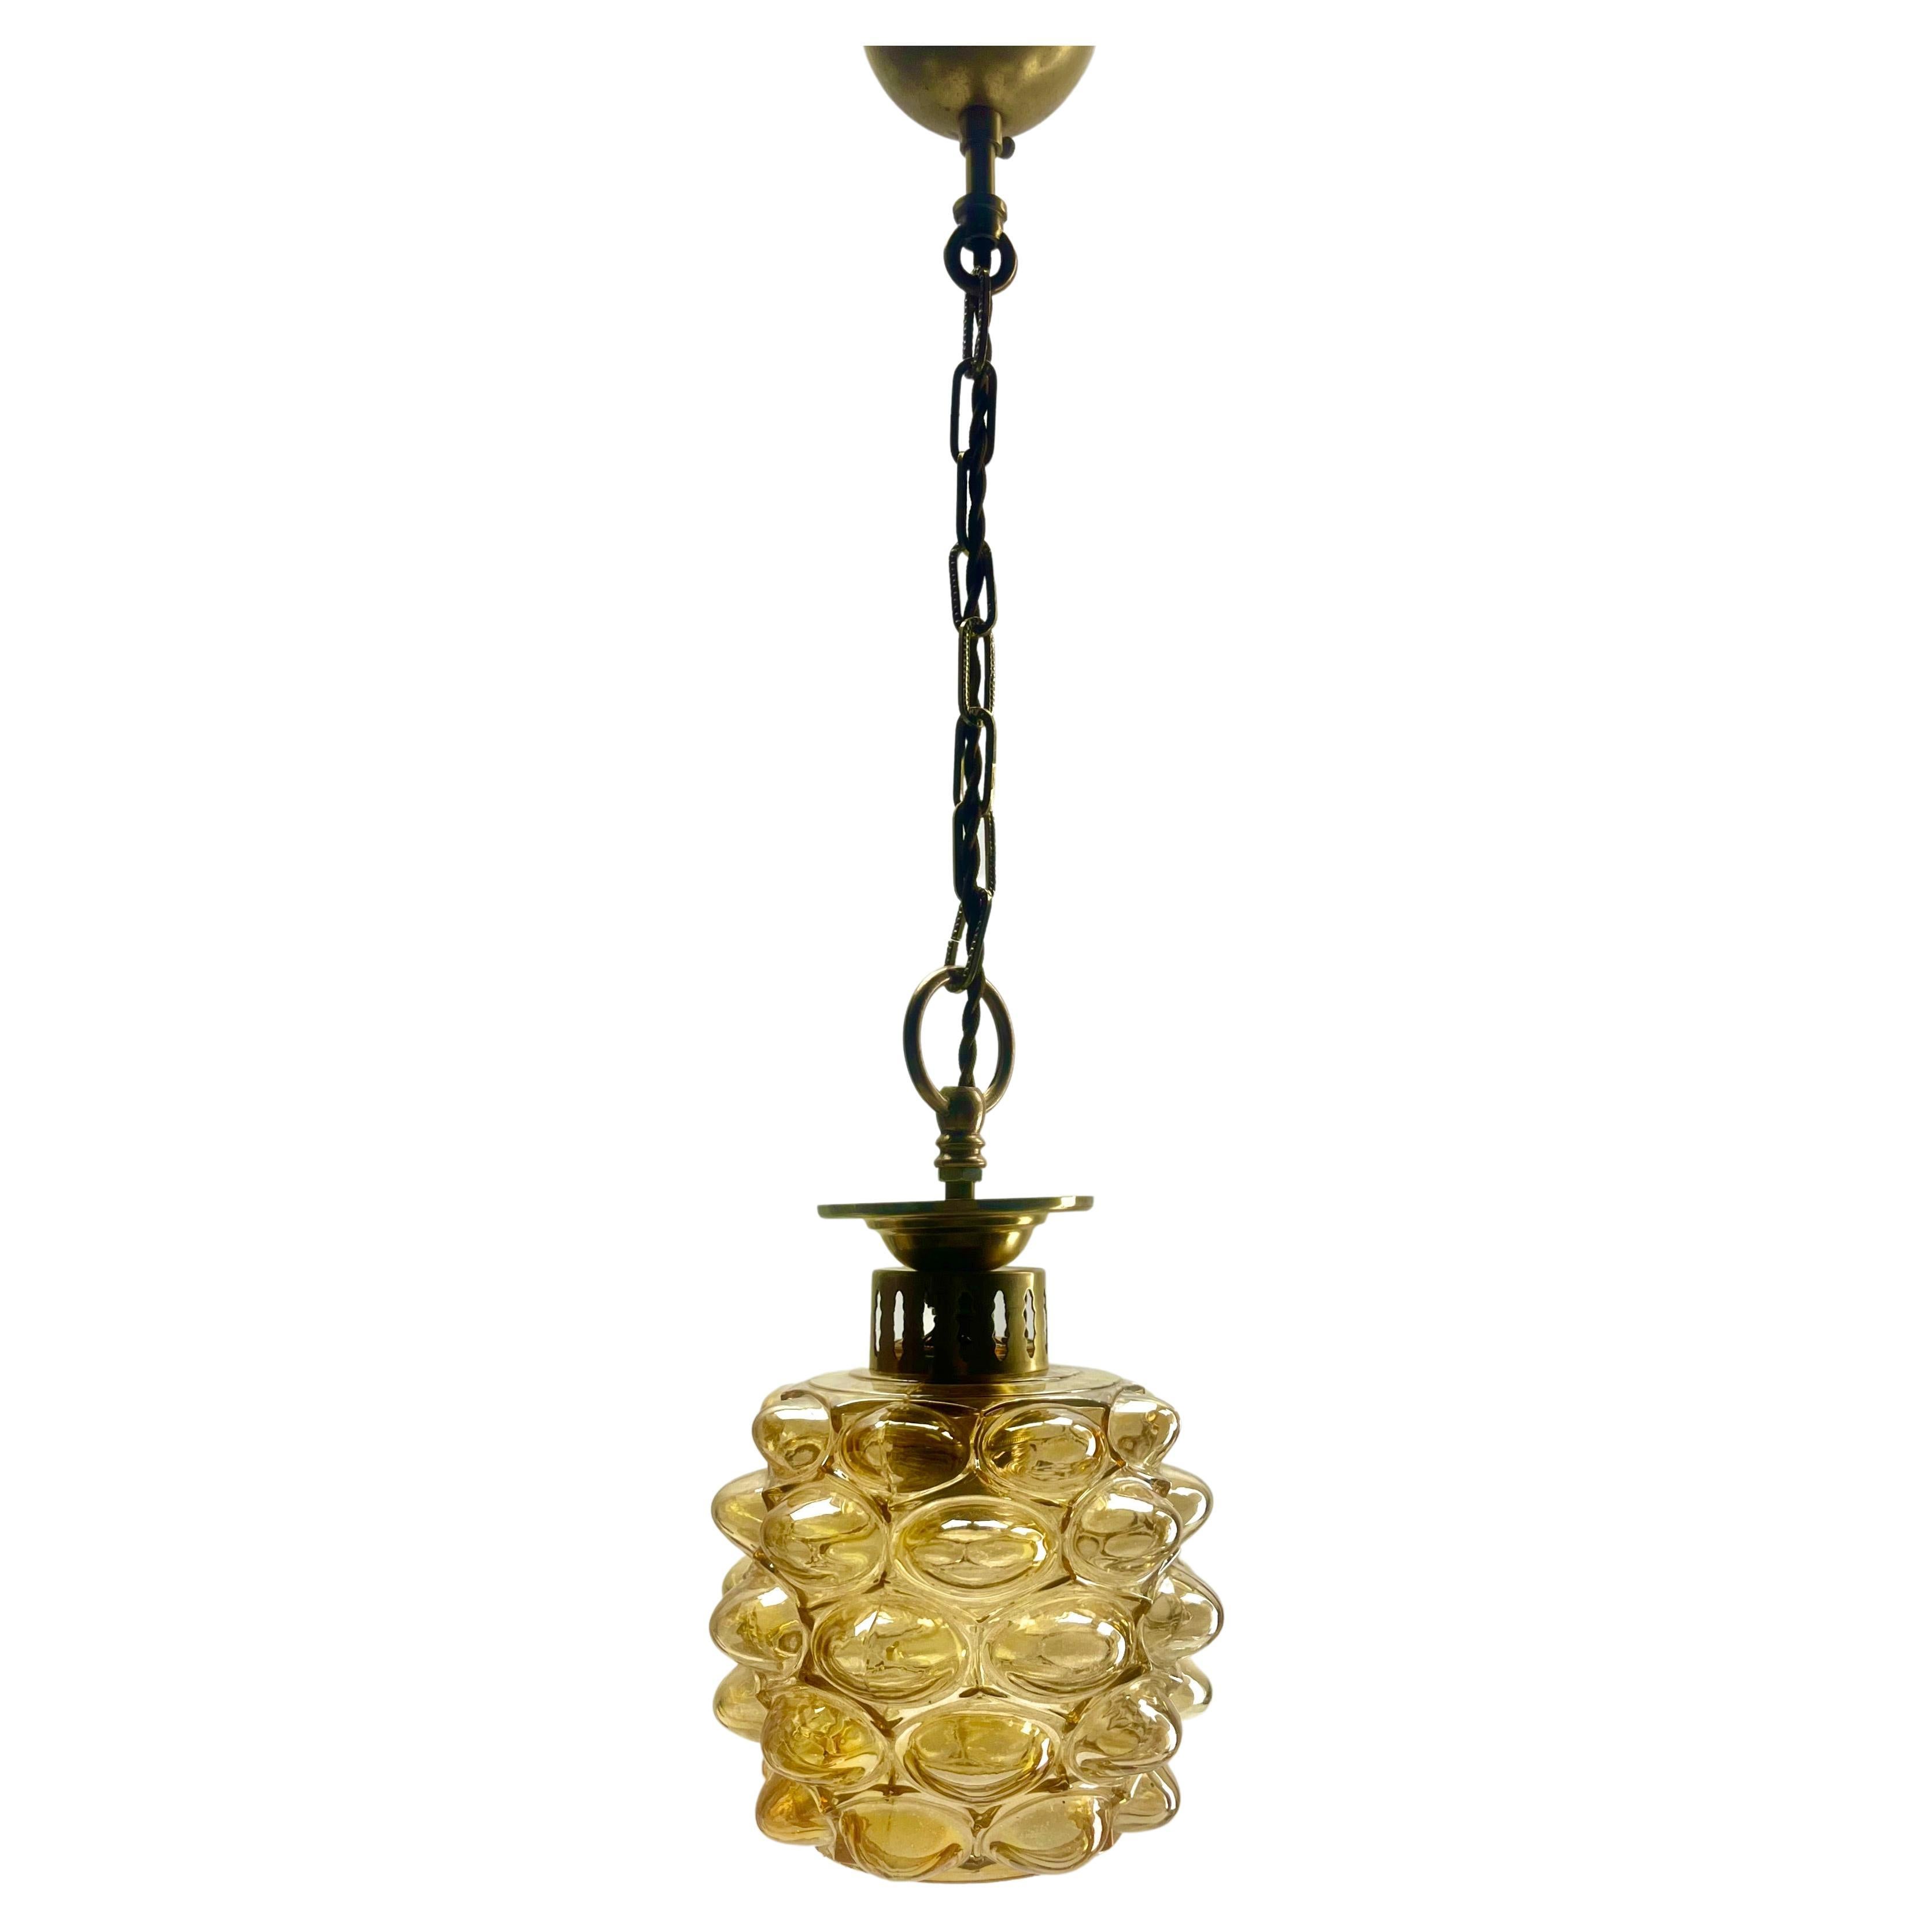 Bubble pendant by Glashütte Limburg during Helena Tyrell Era, 1960s

In excellent condition and in full working order having recently been re-wired and New Fitting E27
With original patina on brass parts.
Lamp total height 60 cm
Size: Glass shade